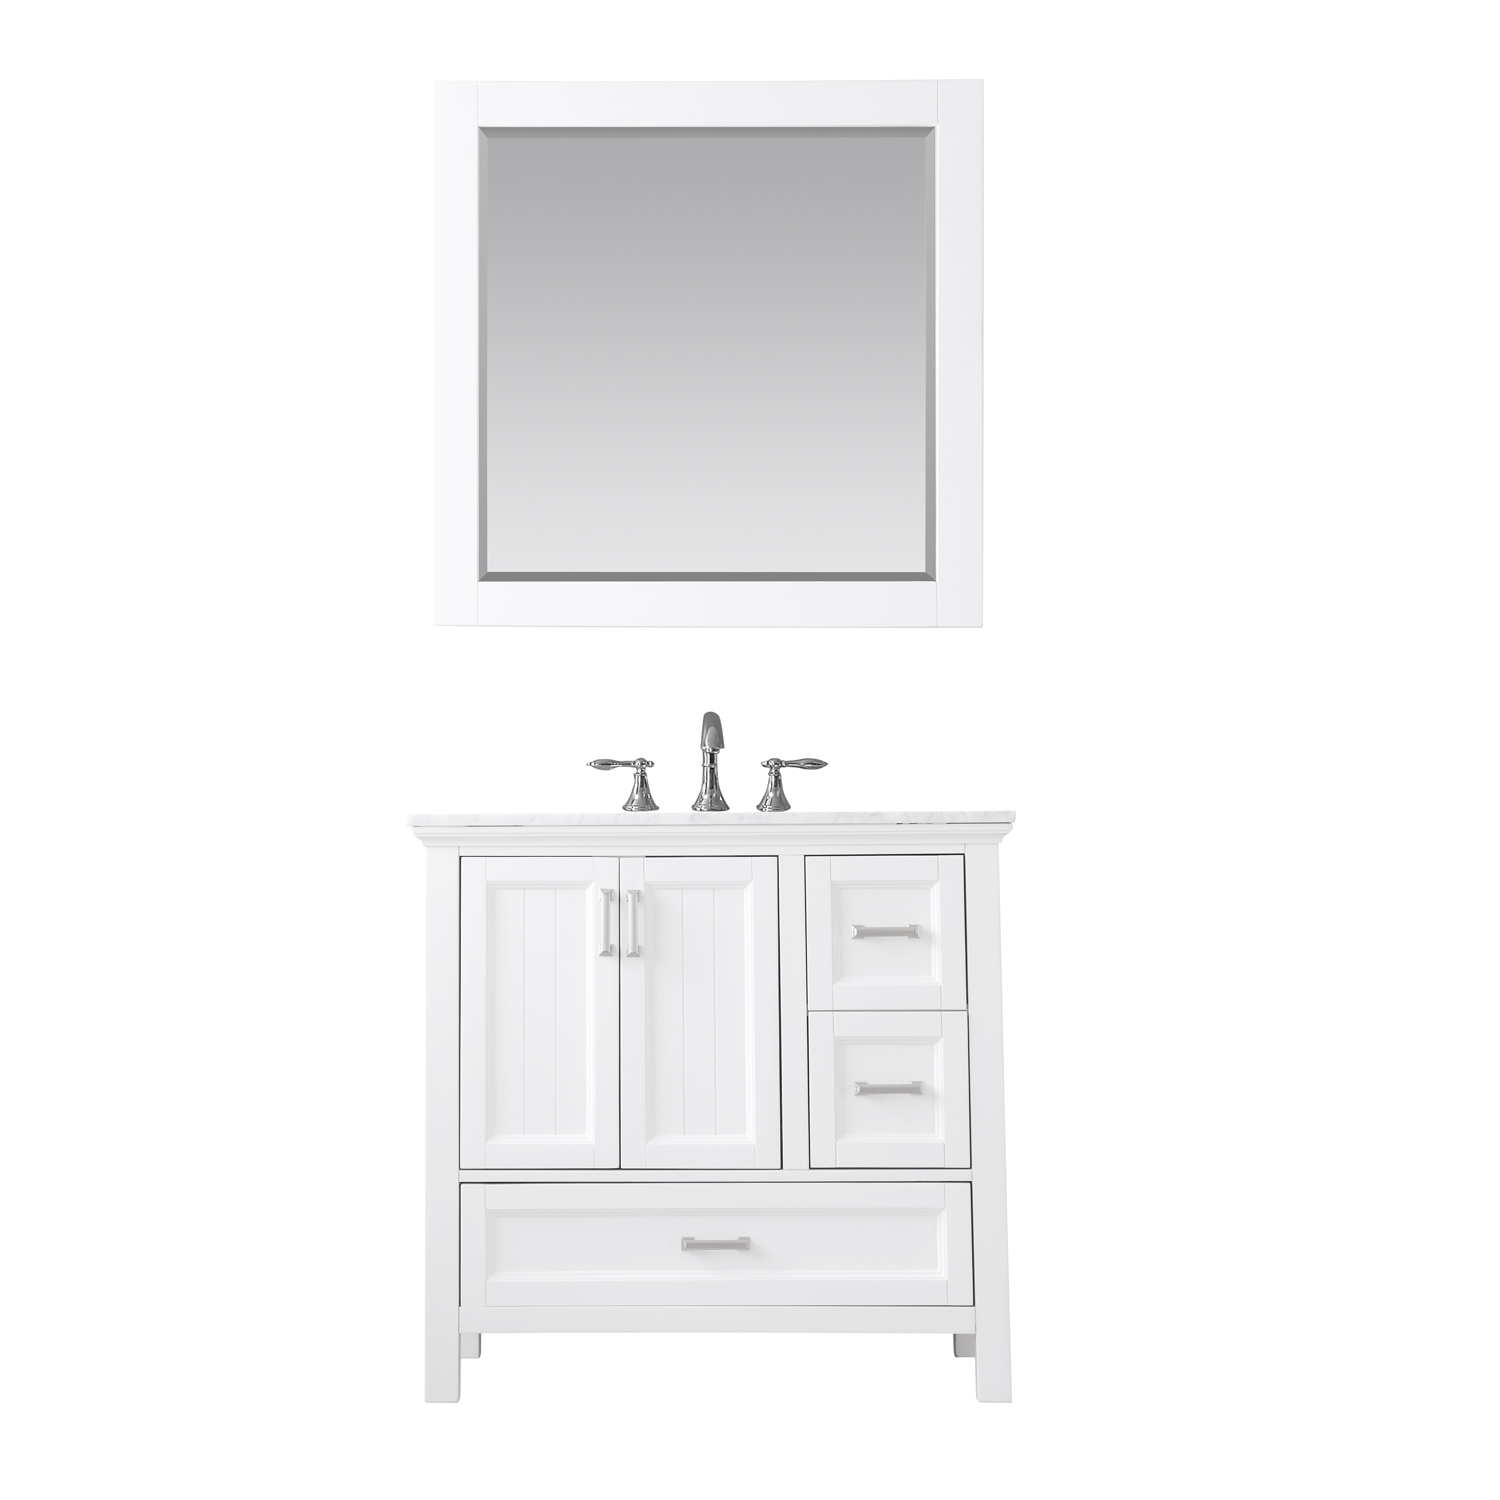 Issac Edwards Collection 36" Single Bathroom Vanity Set in White and Carrara White Marble Countertop without Mirror 